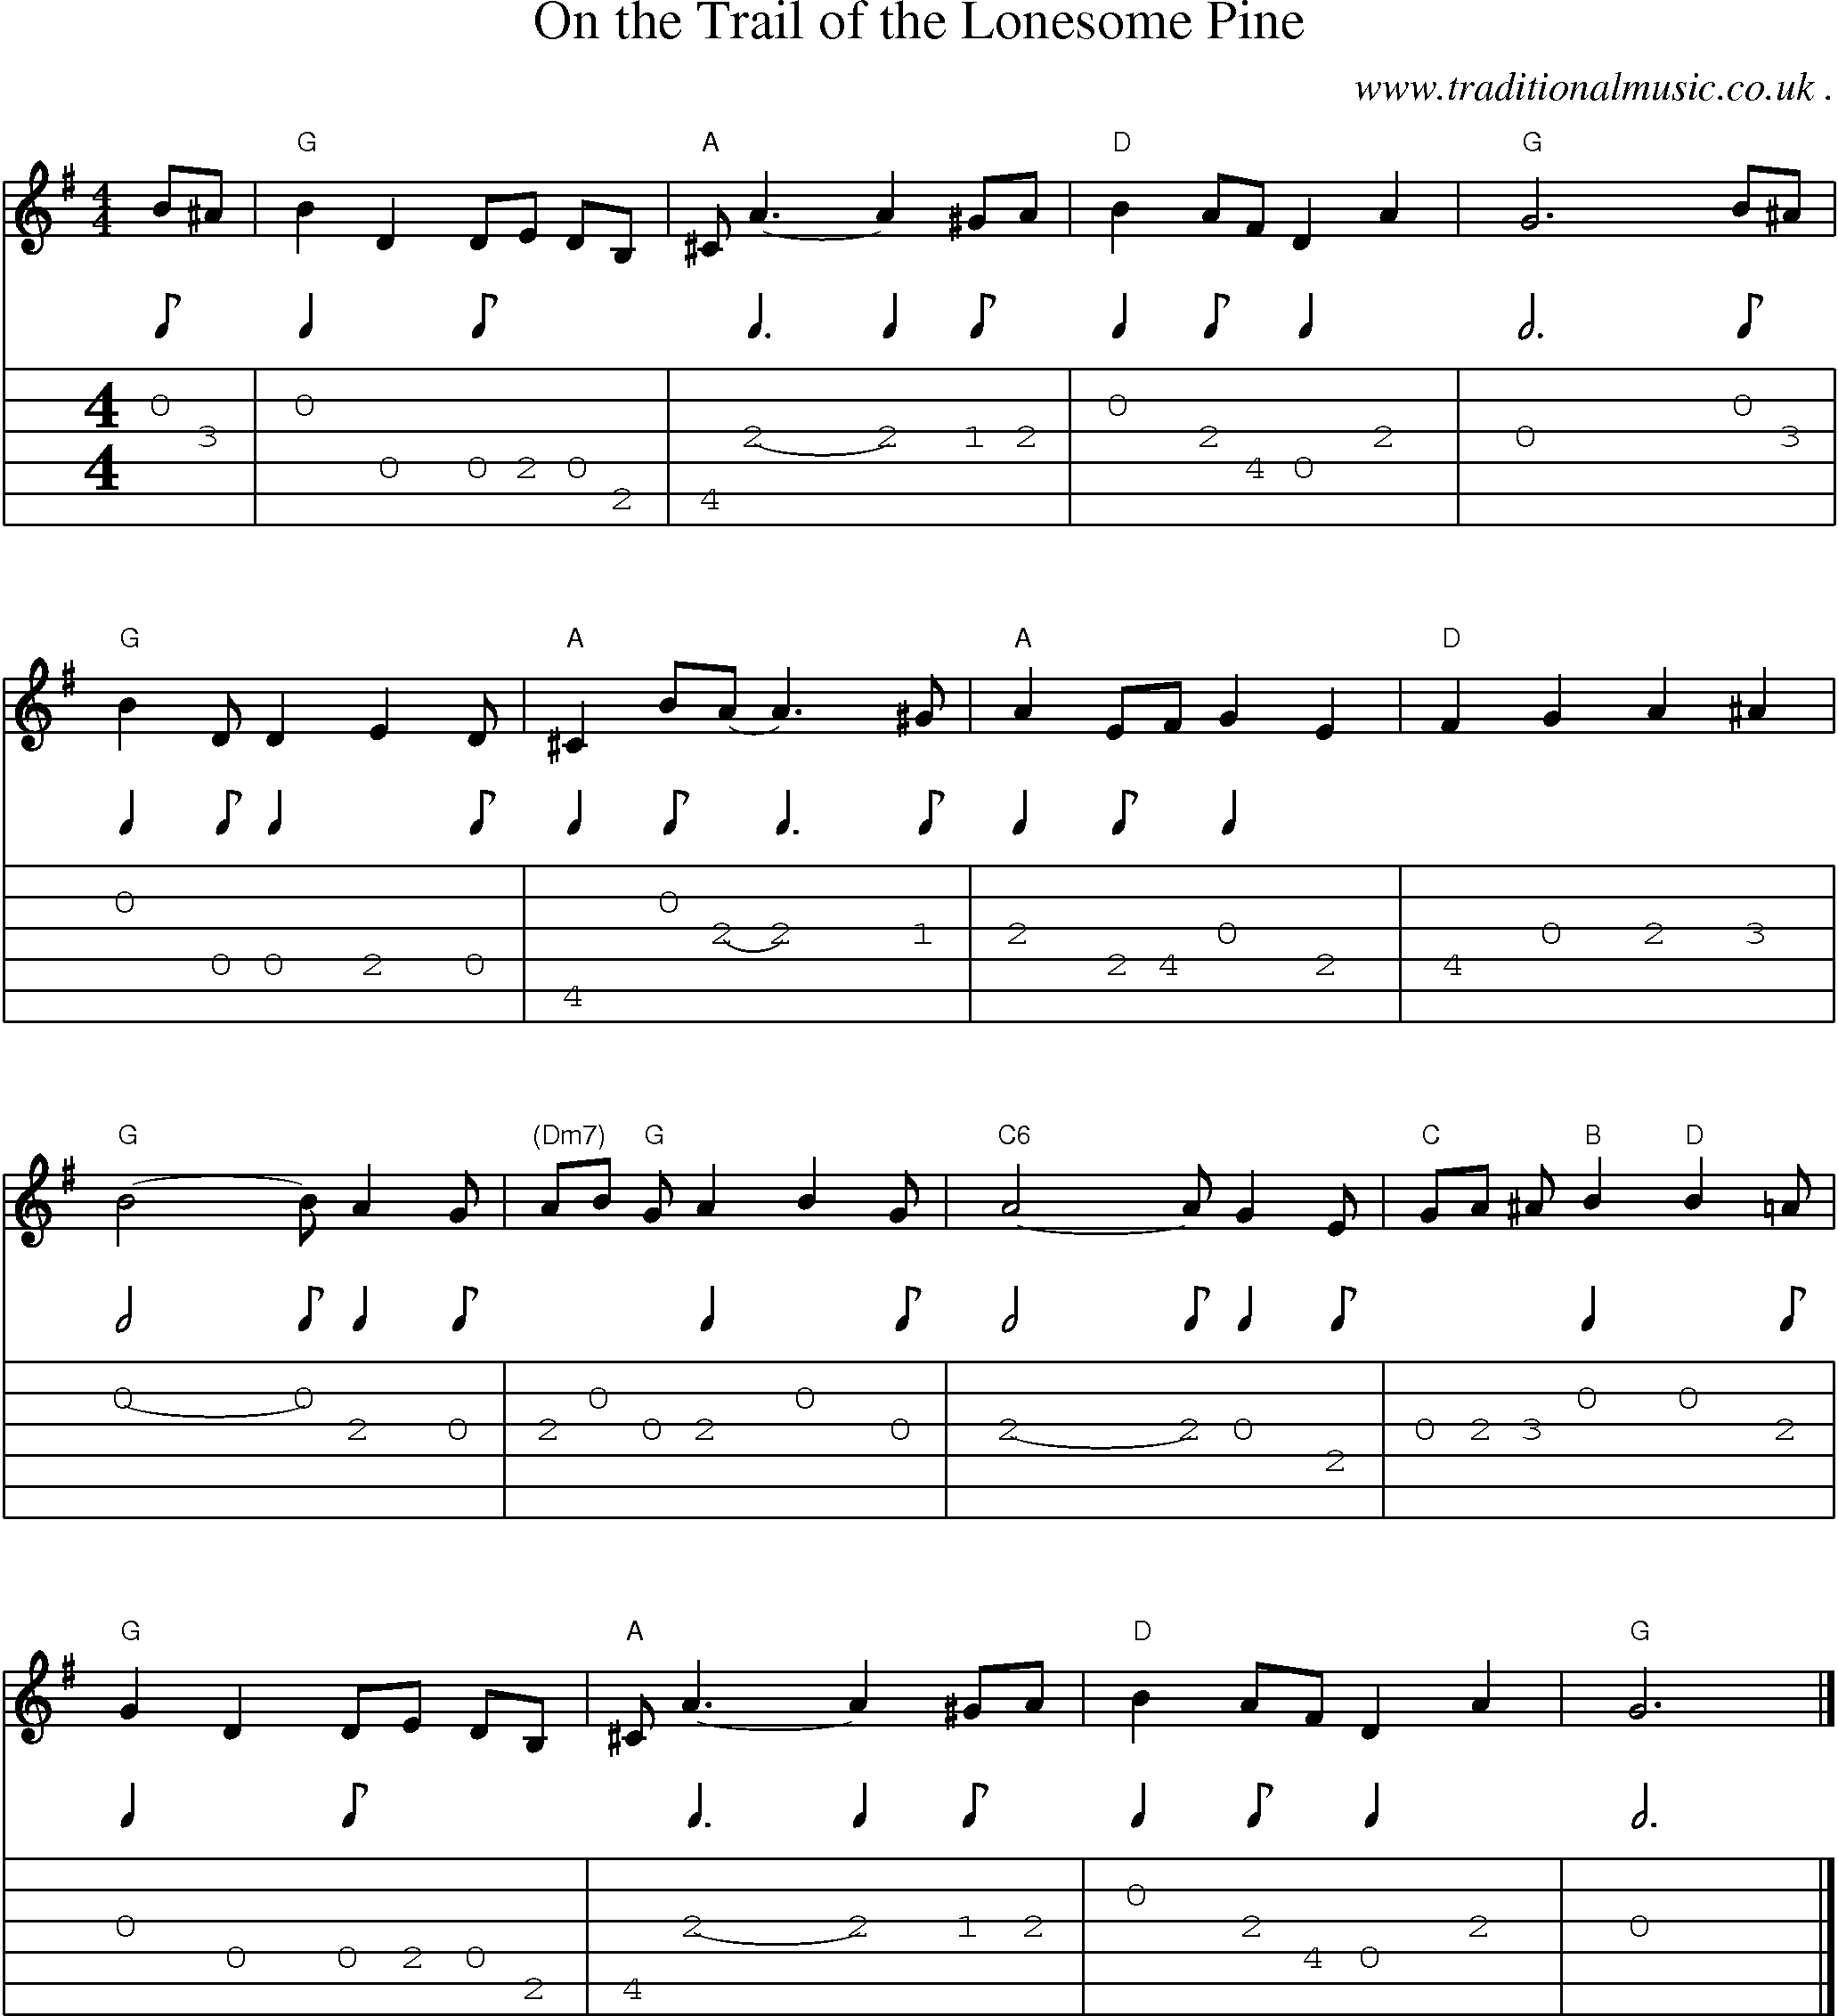 Music Score and Guitar Tabs for On the Trail of the Lonesome Pine